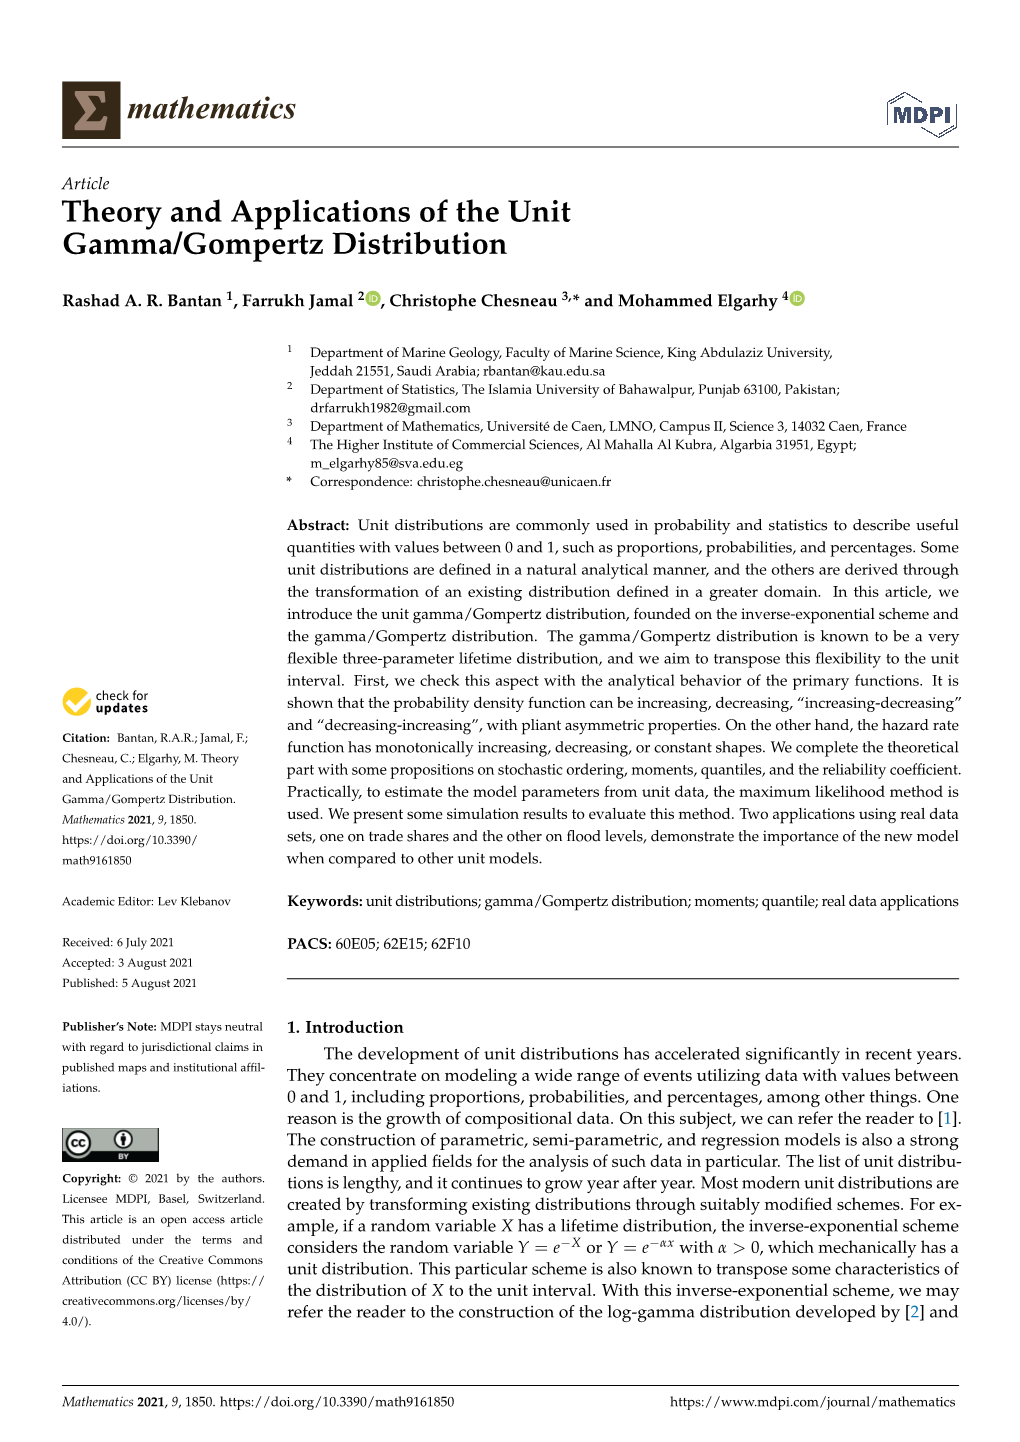 Theory and Applications of the Unit Gamma/Gompertz Distribution